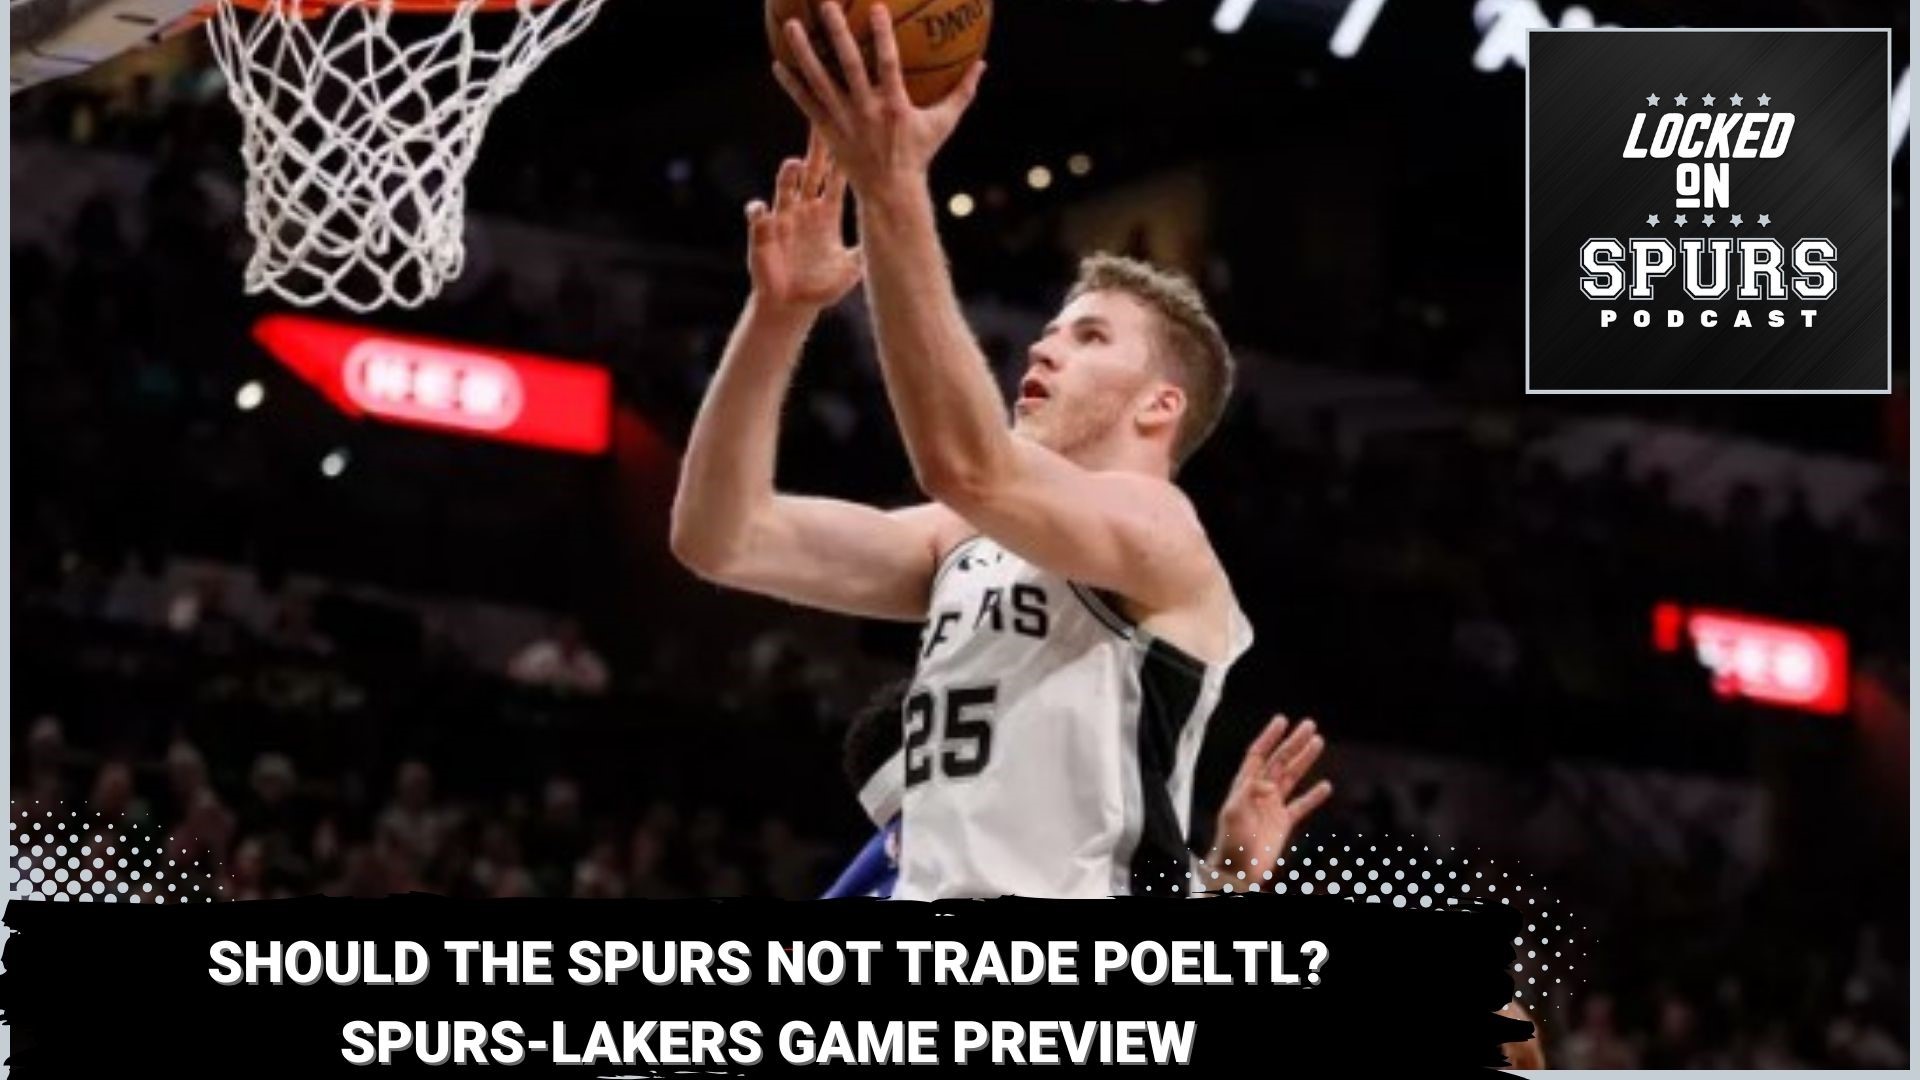 Are the Spurs better off re-signing Poeltl instead of trading him?